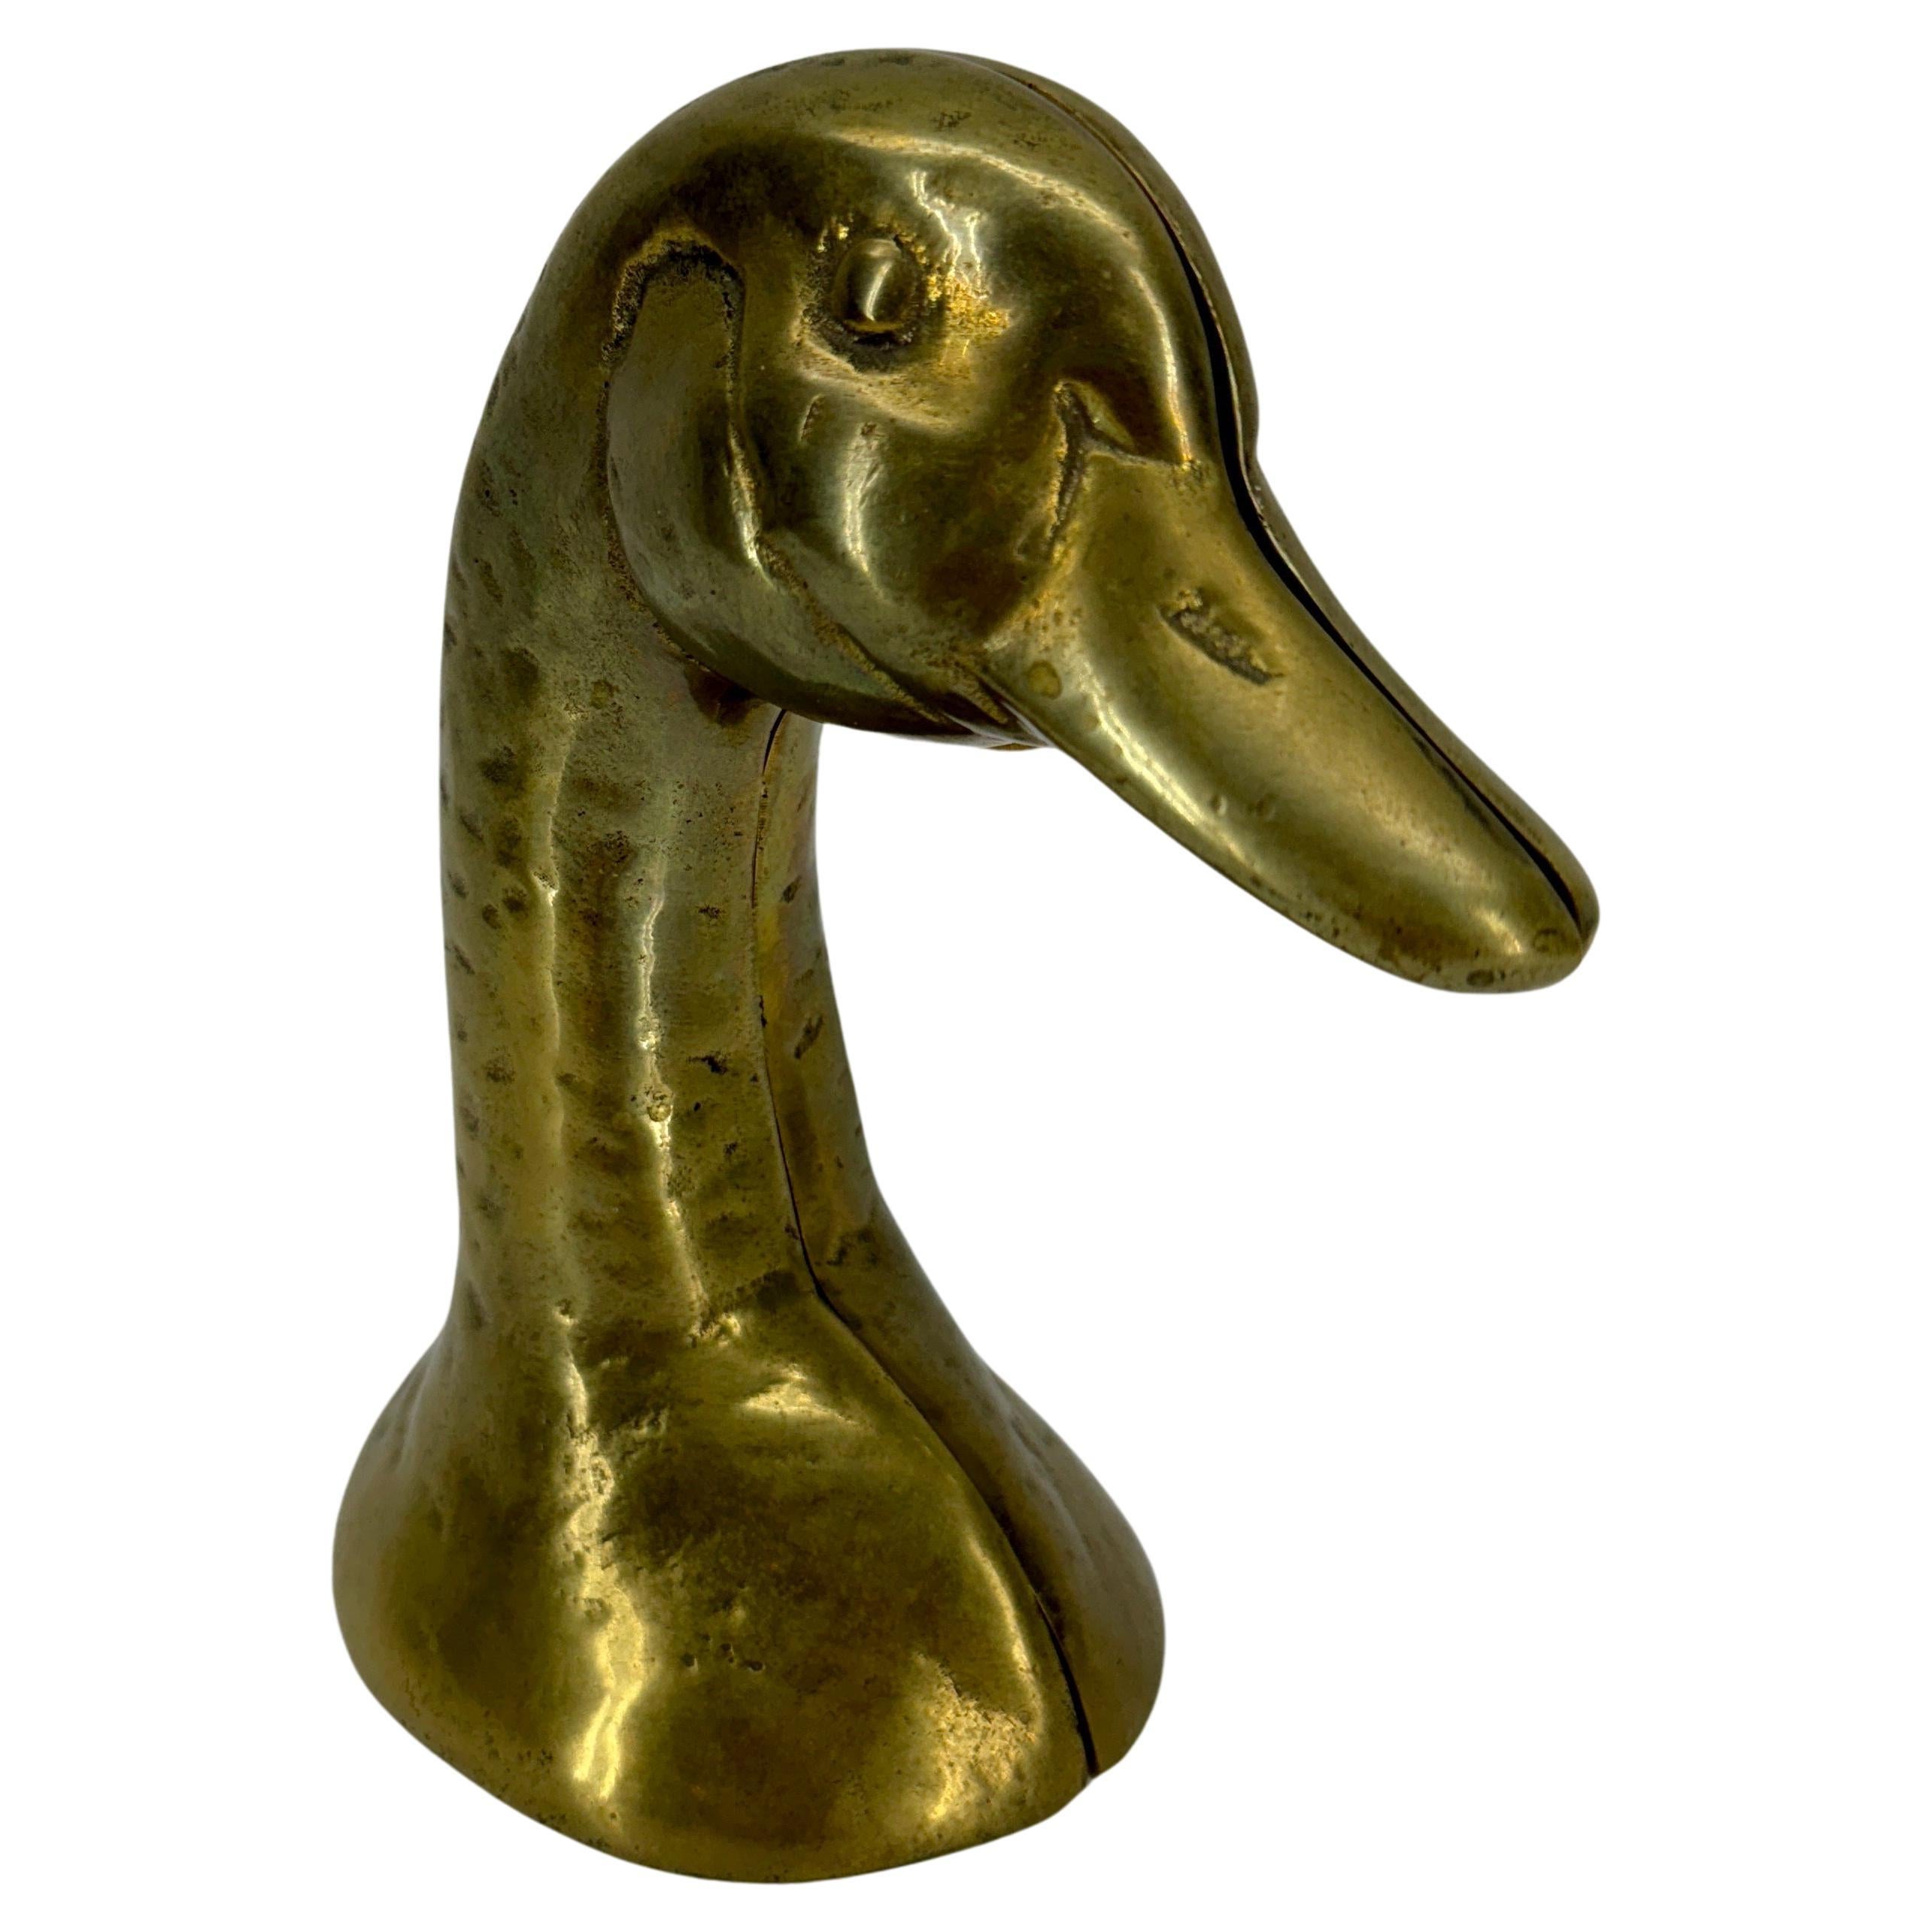 Set of Mid-Century Duck Brass Bookends Sculptures

Substantial in size and weight, these solid vintage brass ducks are both form and function. Fabulous pair displayed on a bookshelf or desk or standing alone as sculptures on a table as a statement